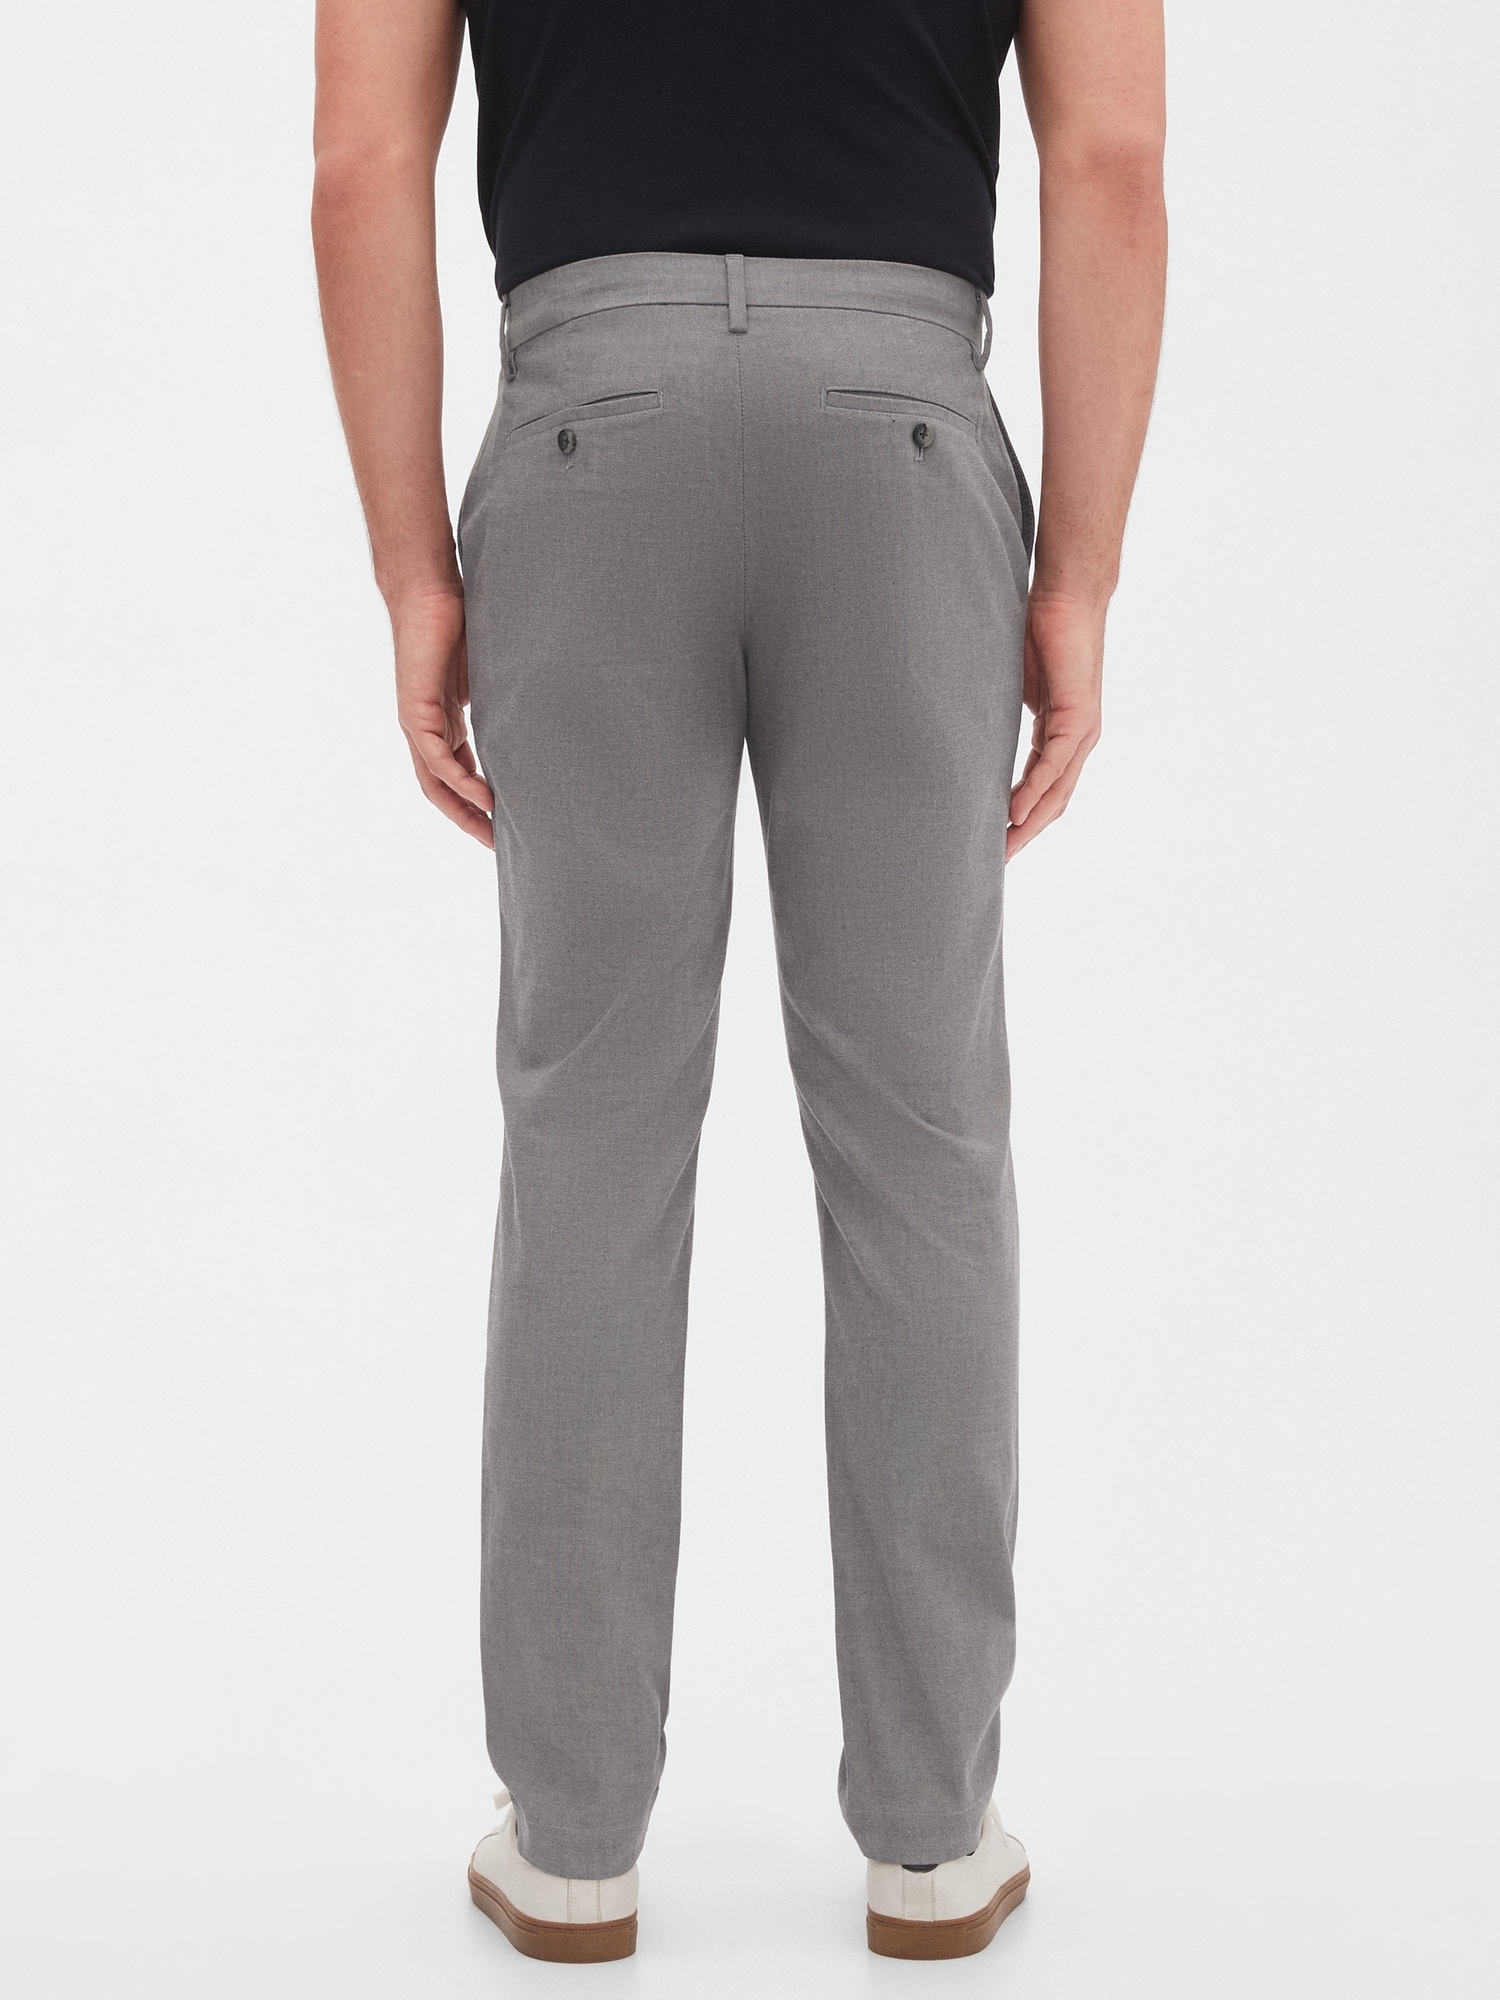 Aiden Slim-Fit Stretch Grey Oxford Pant